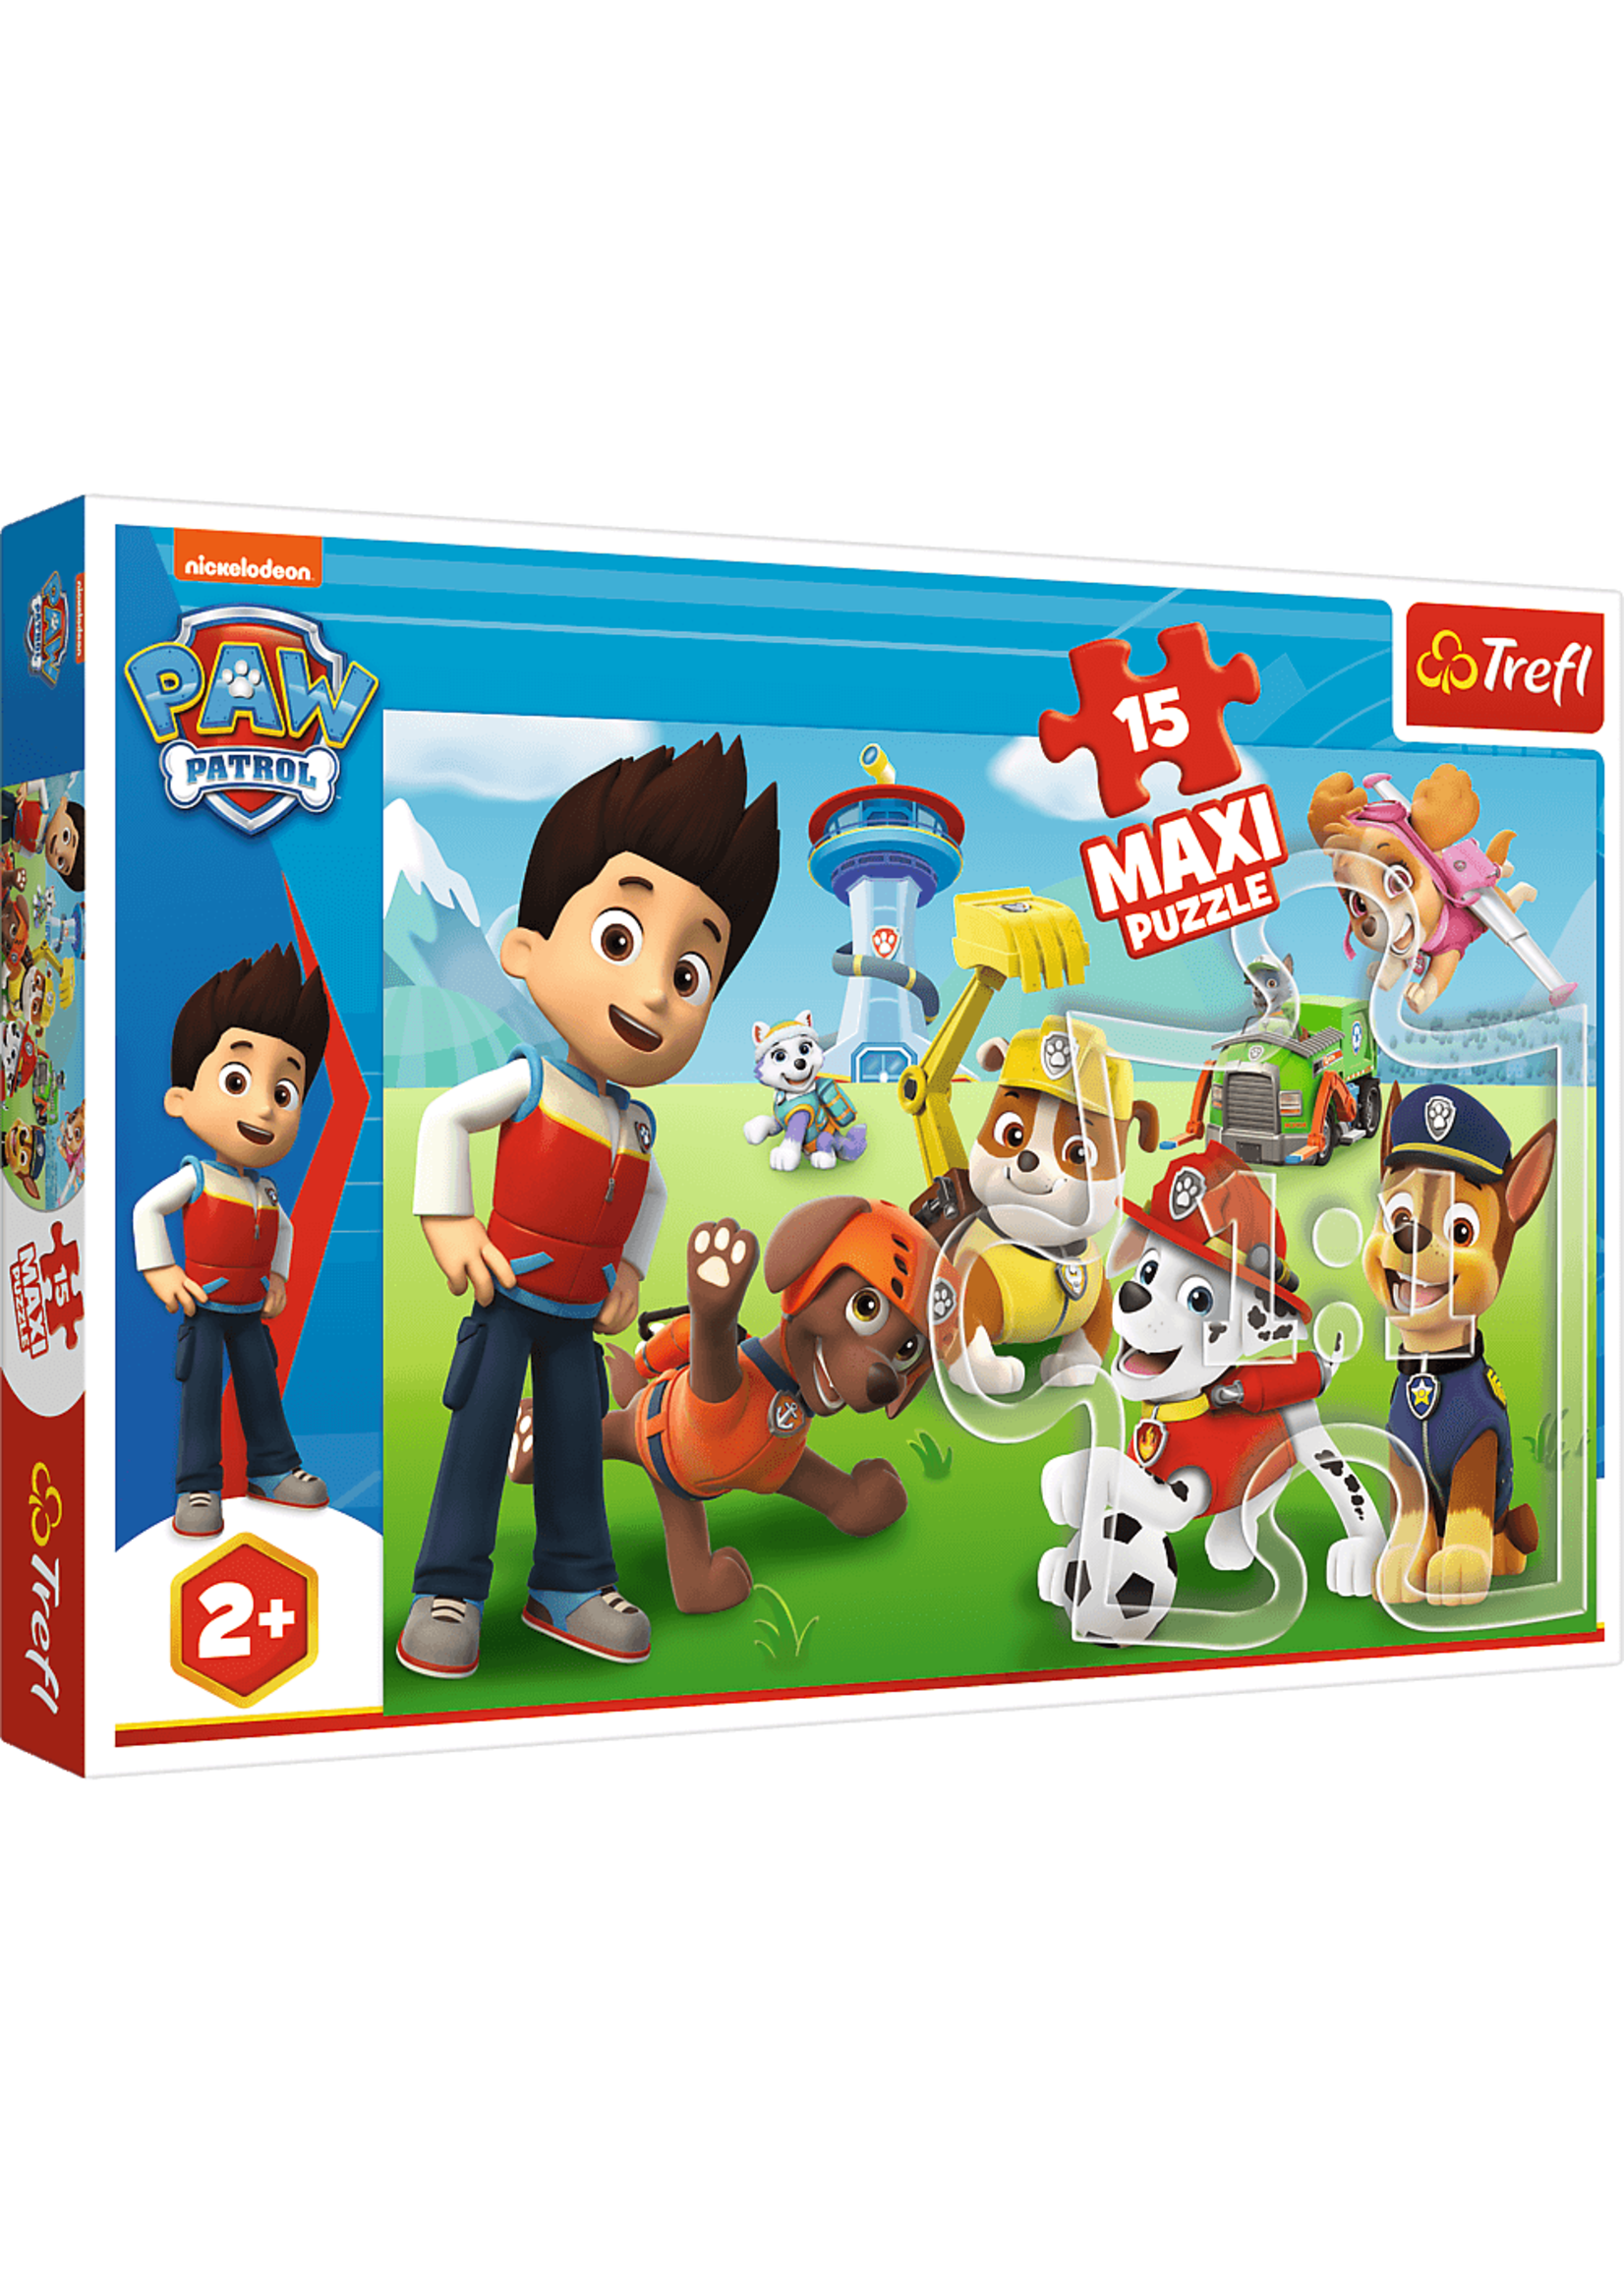 Nickelodeon Paw Patrol puzzle from Nickelodeon